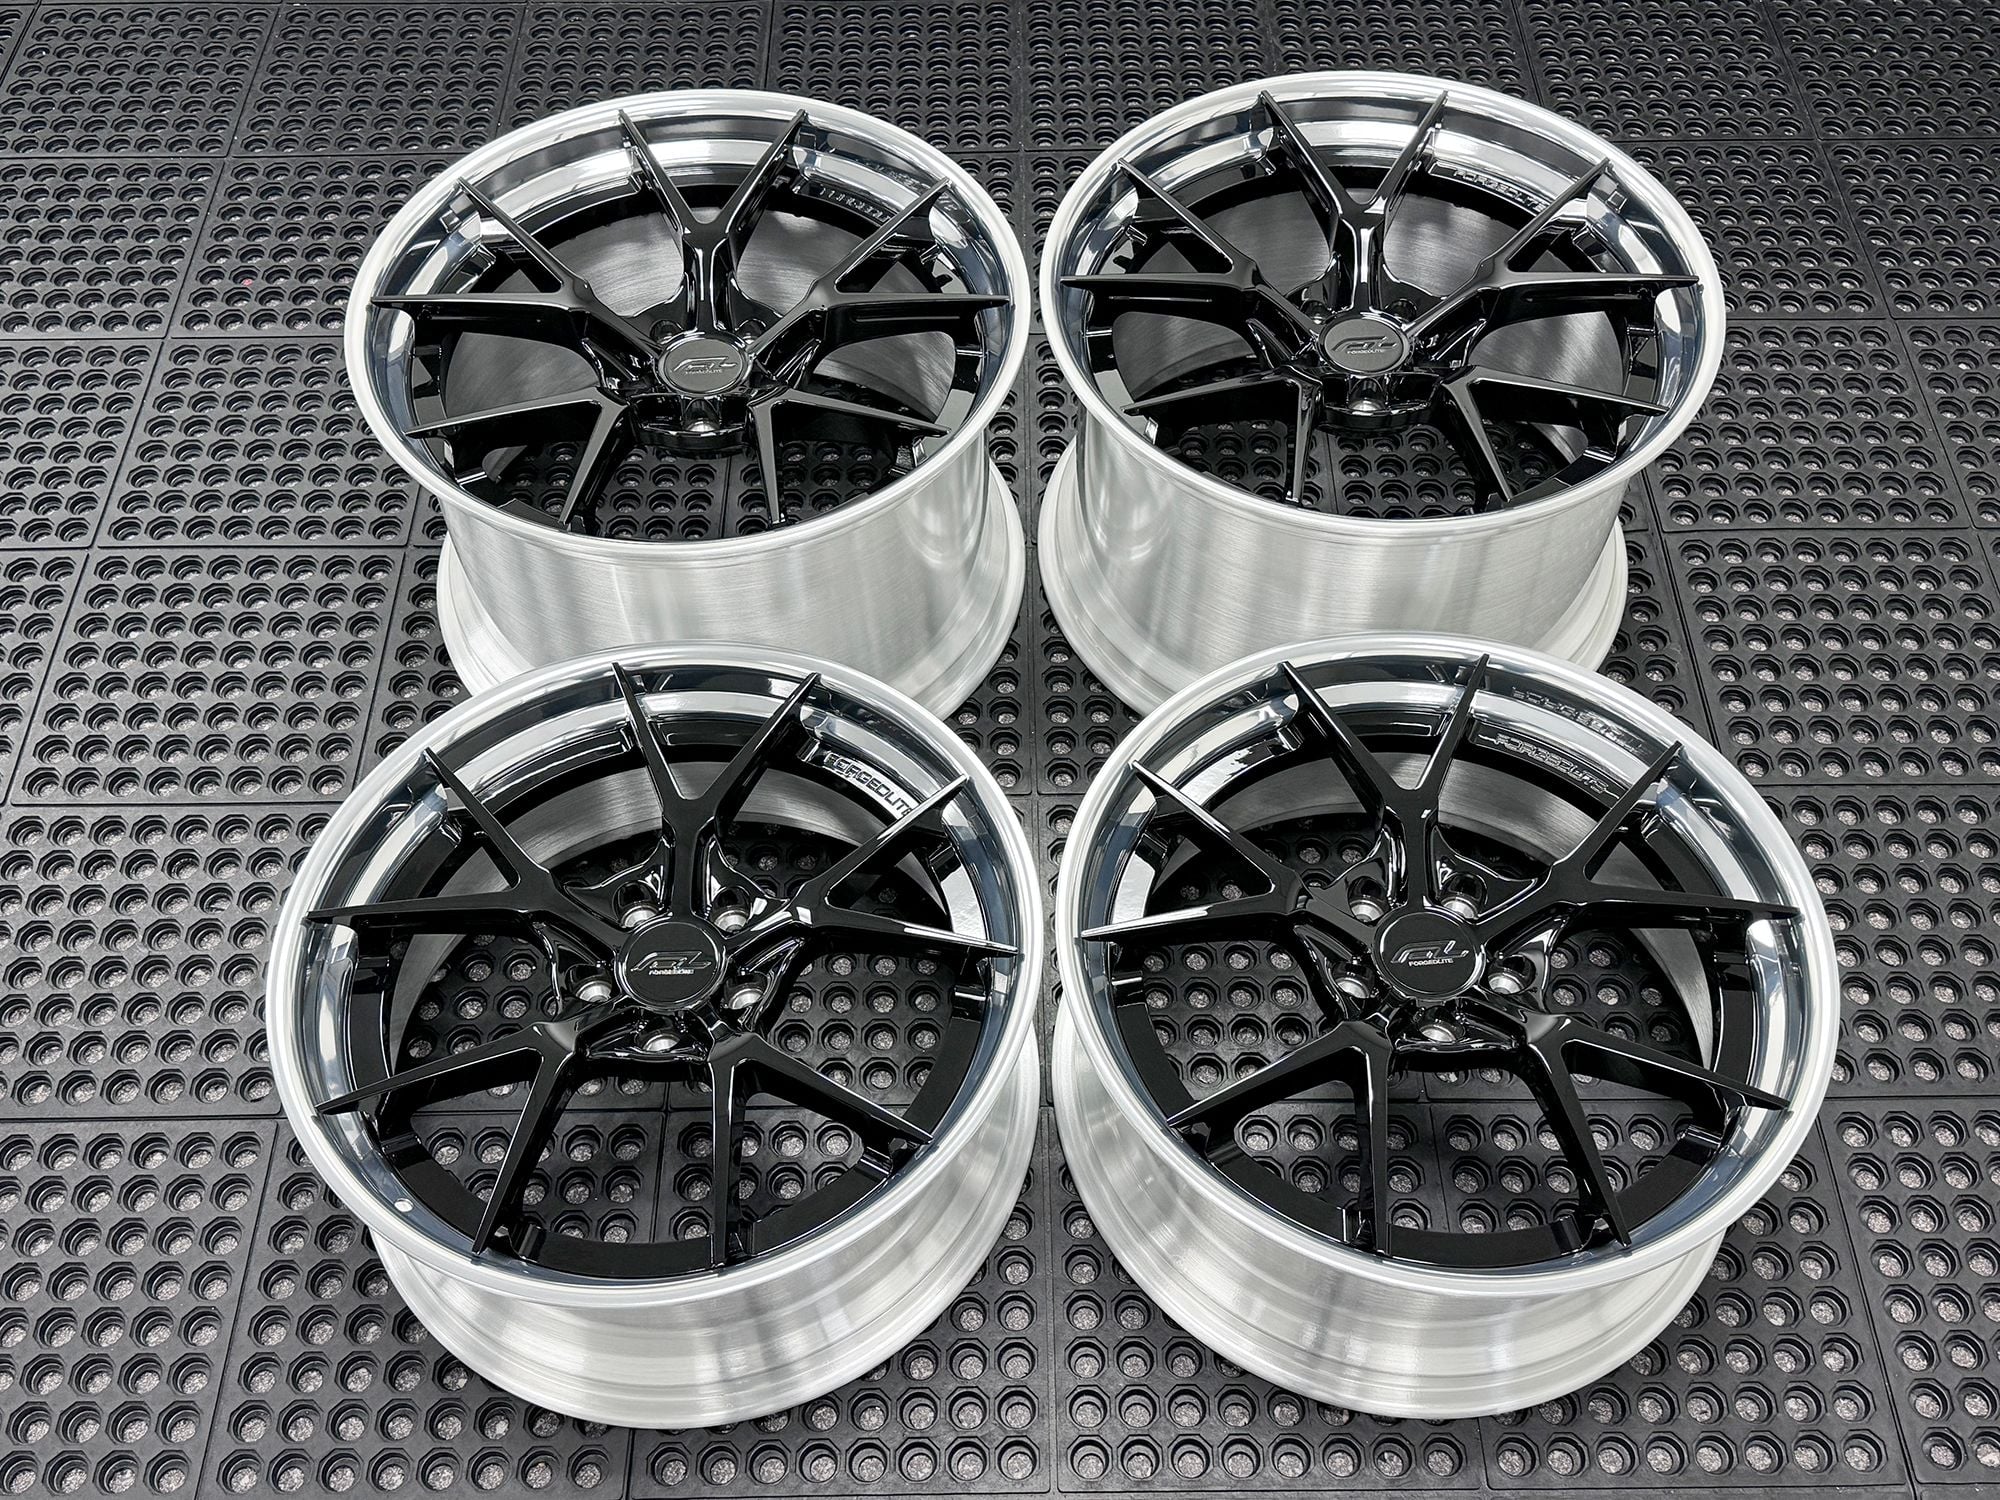 S650 Mustang 19" and 20" Forgedlite Wheels for your S650 Ford Mustang hed_lip_1_3d4d6f51bb055c78a8747765e3d2061eea0a4595